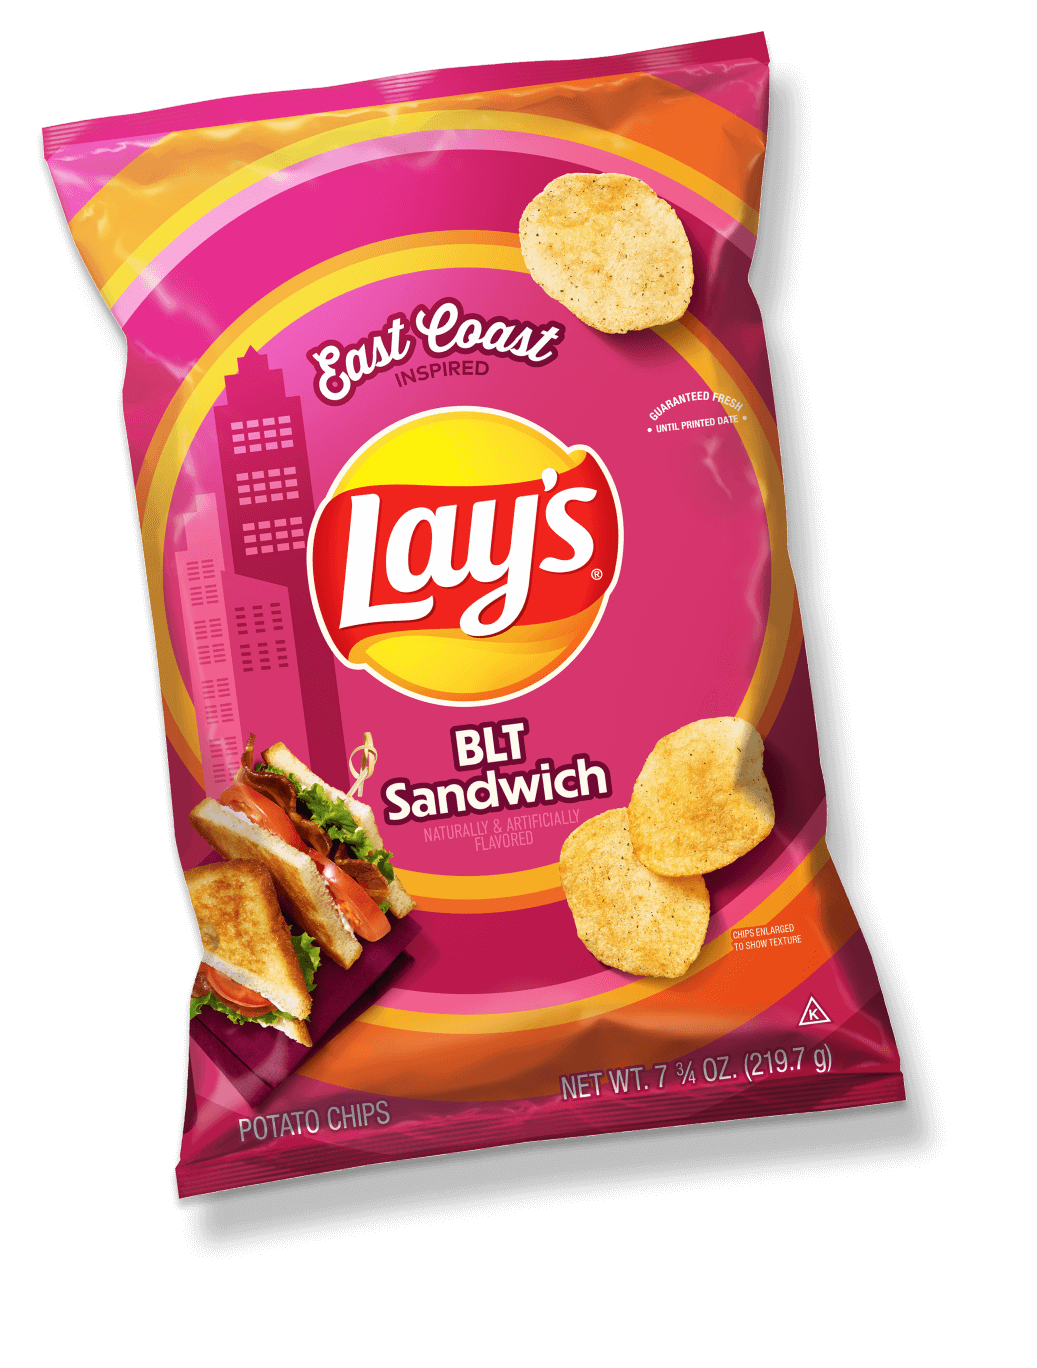 Lay's BLT Sandwich flavored chips bag.